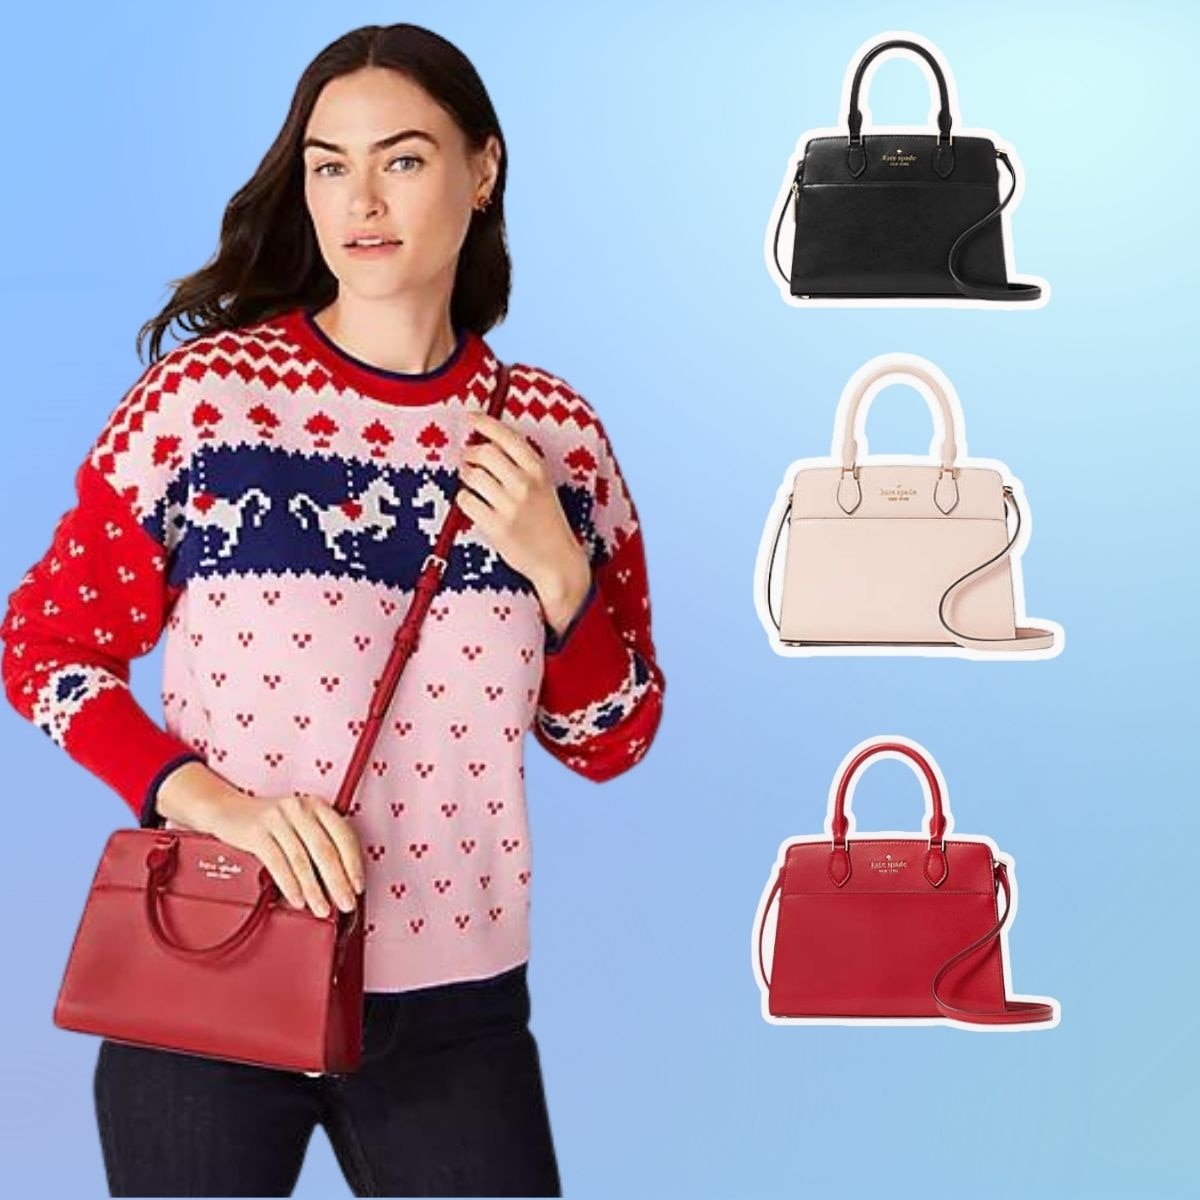 Get This $379 Kate Spade Satchel for Just $90